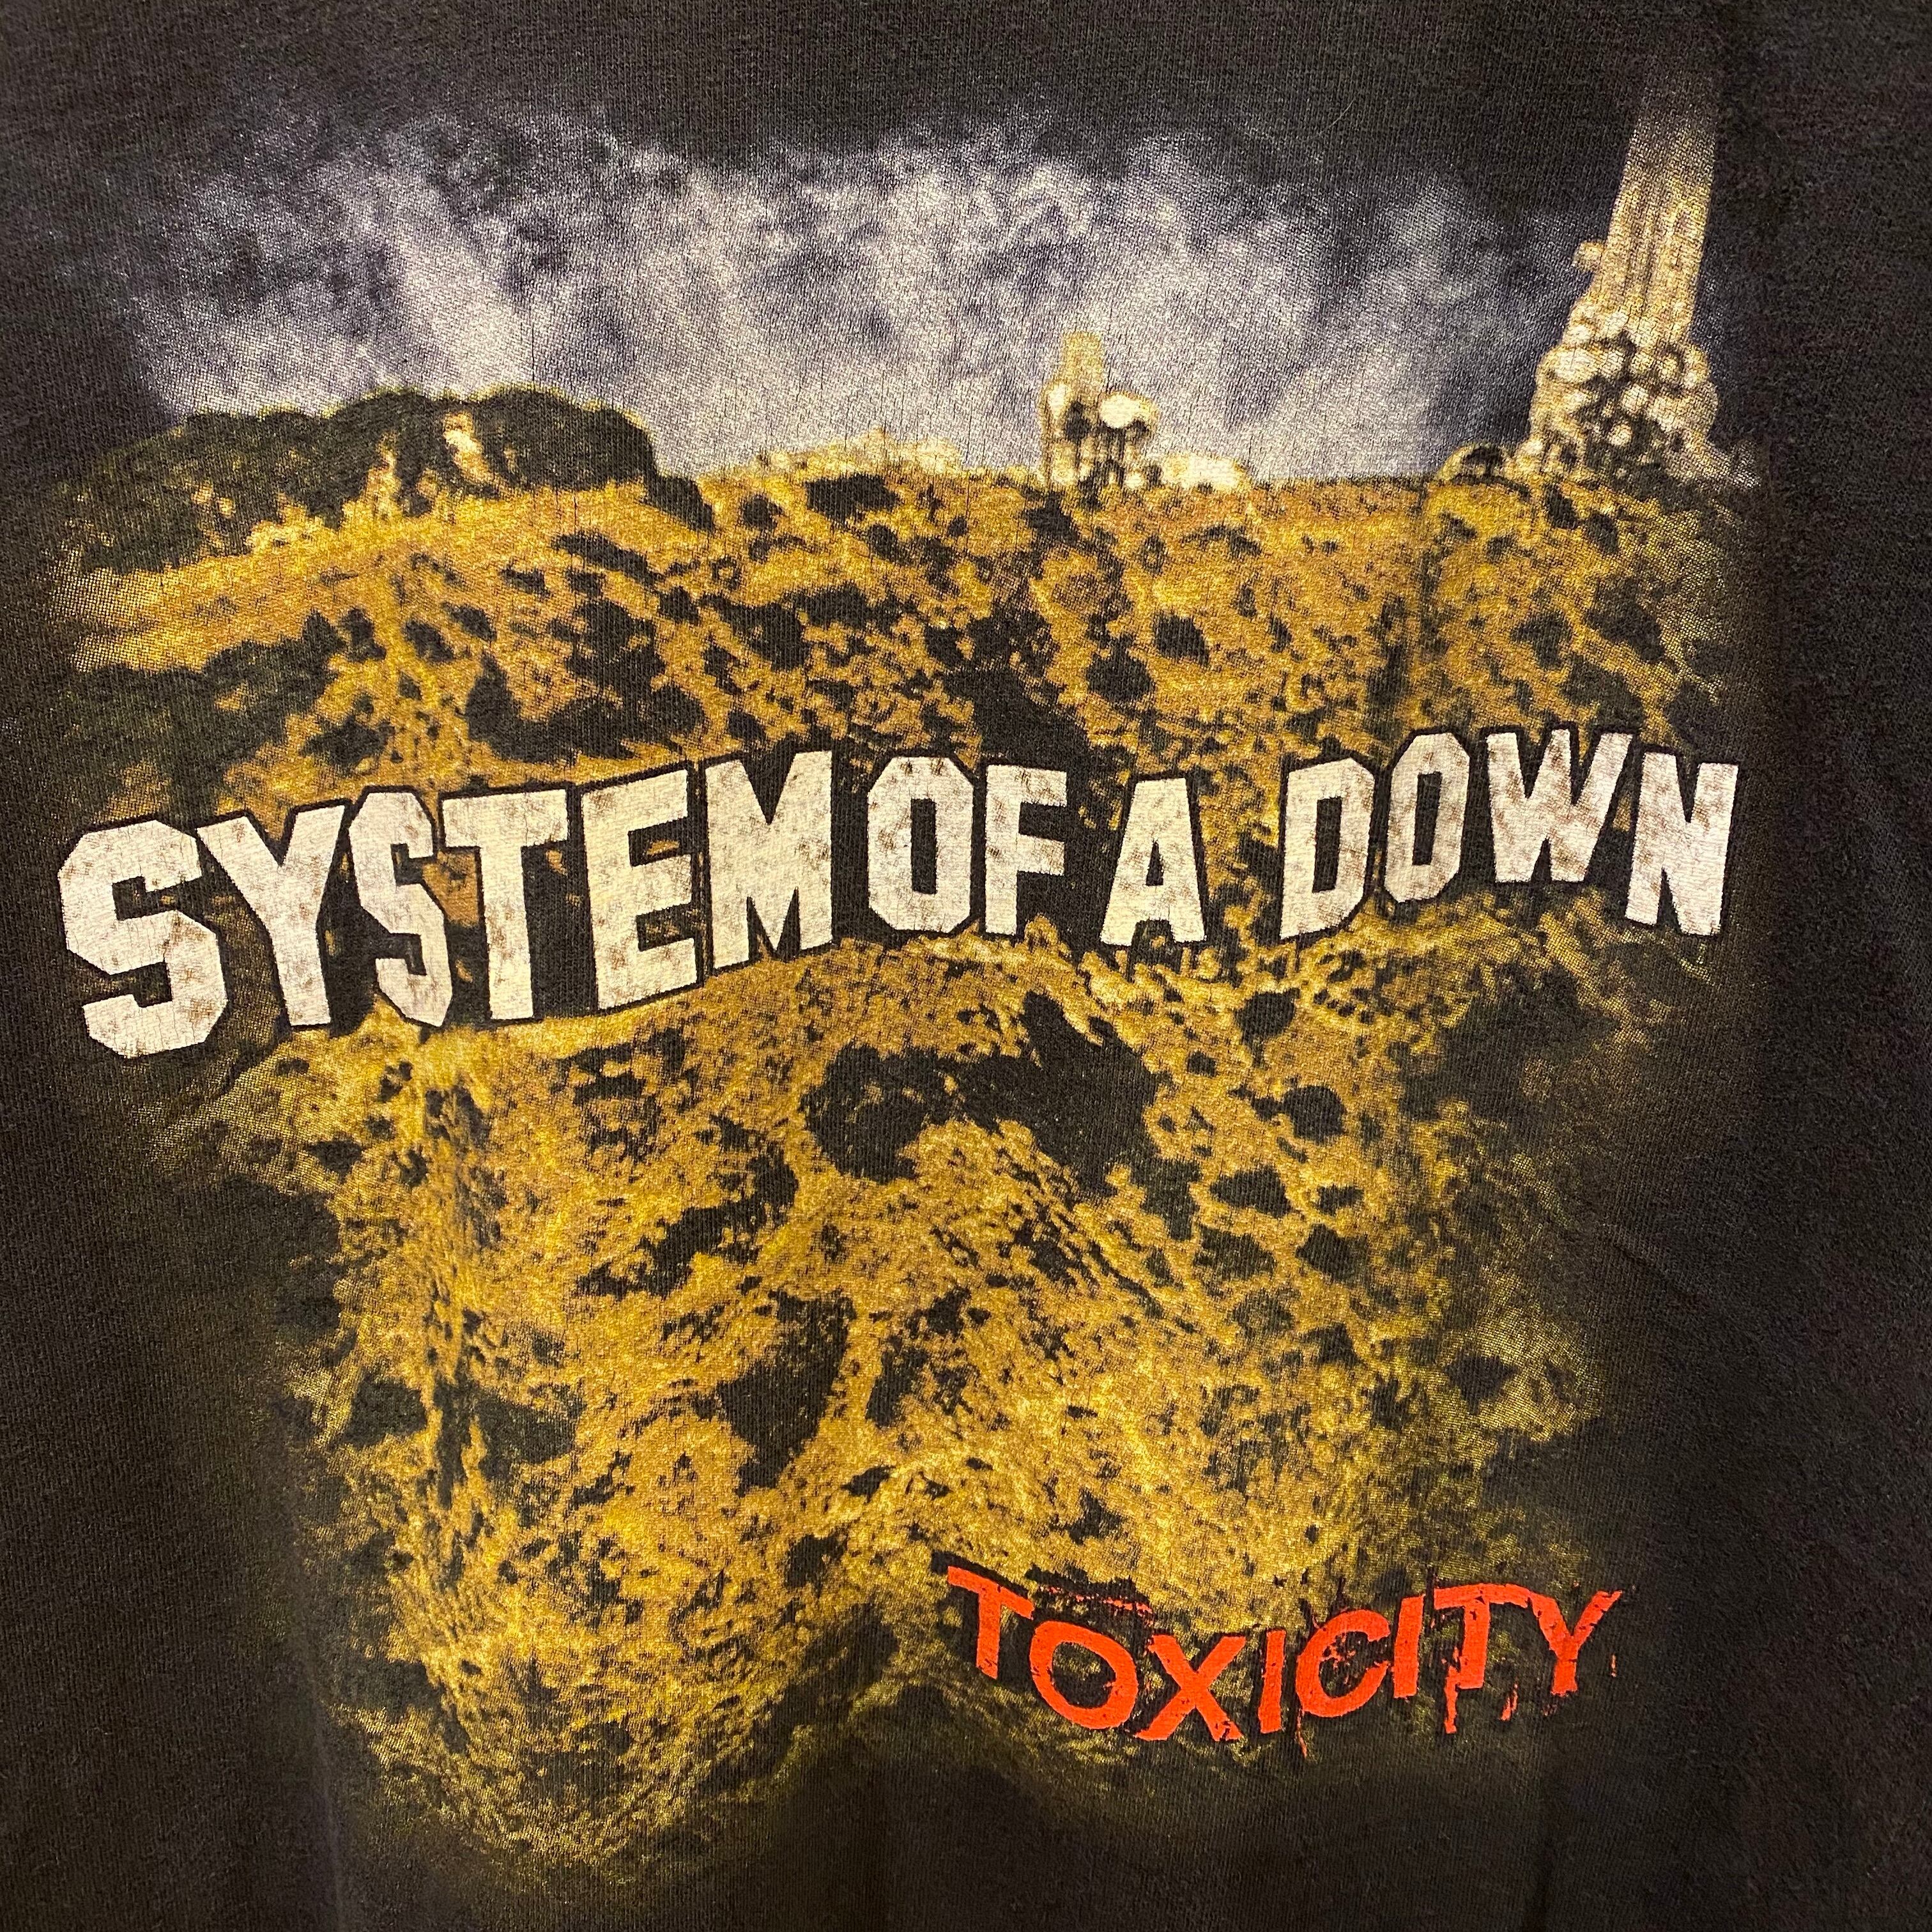 00s SYSTEM OF A DOWN Tシャツ | VOSTOK